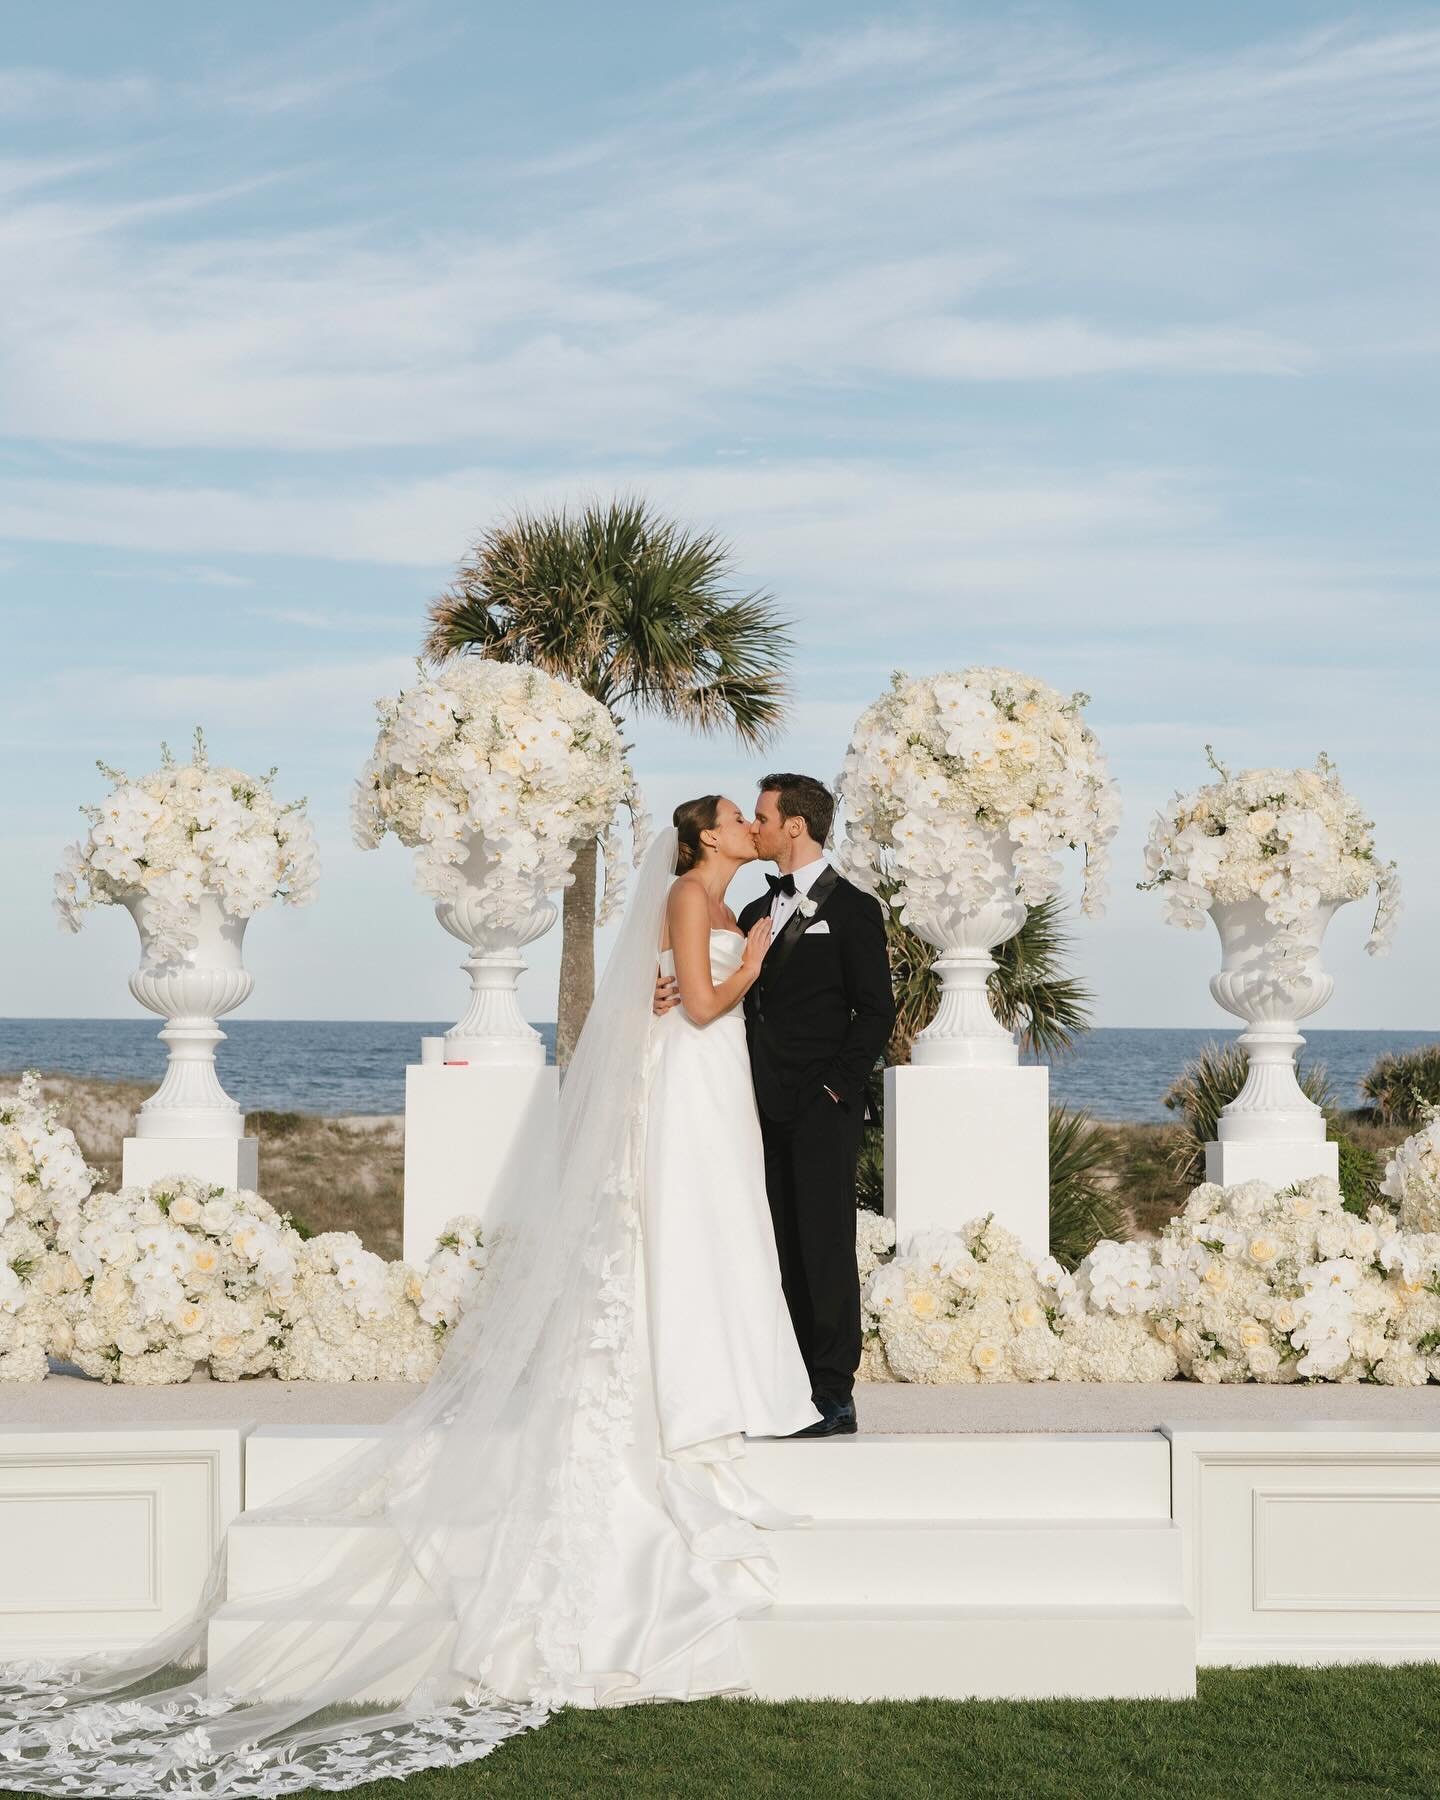 Stepping into a world of pure elegance and bliss with K+C on their all-white wedding day 🕊️ 

Planning &amp; Design: @collinskormanevents 
Venue: @ritzcarltonameliaisland 
Photographer: @gaylebrooker
Videographer: @h2hmedia 

#ameliaislandwedding #a